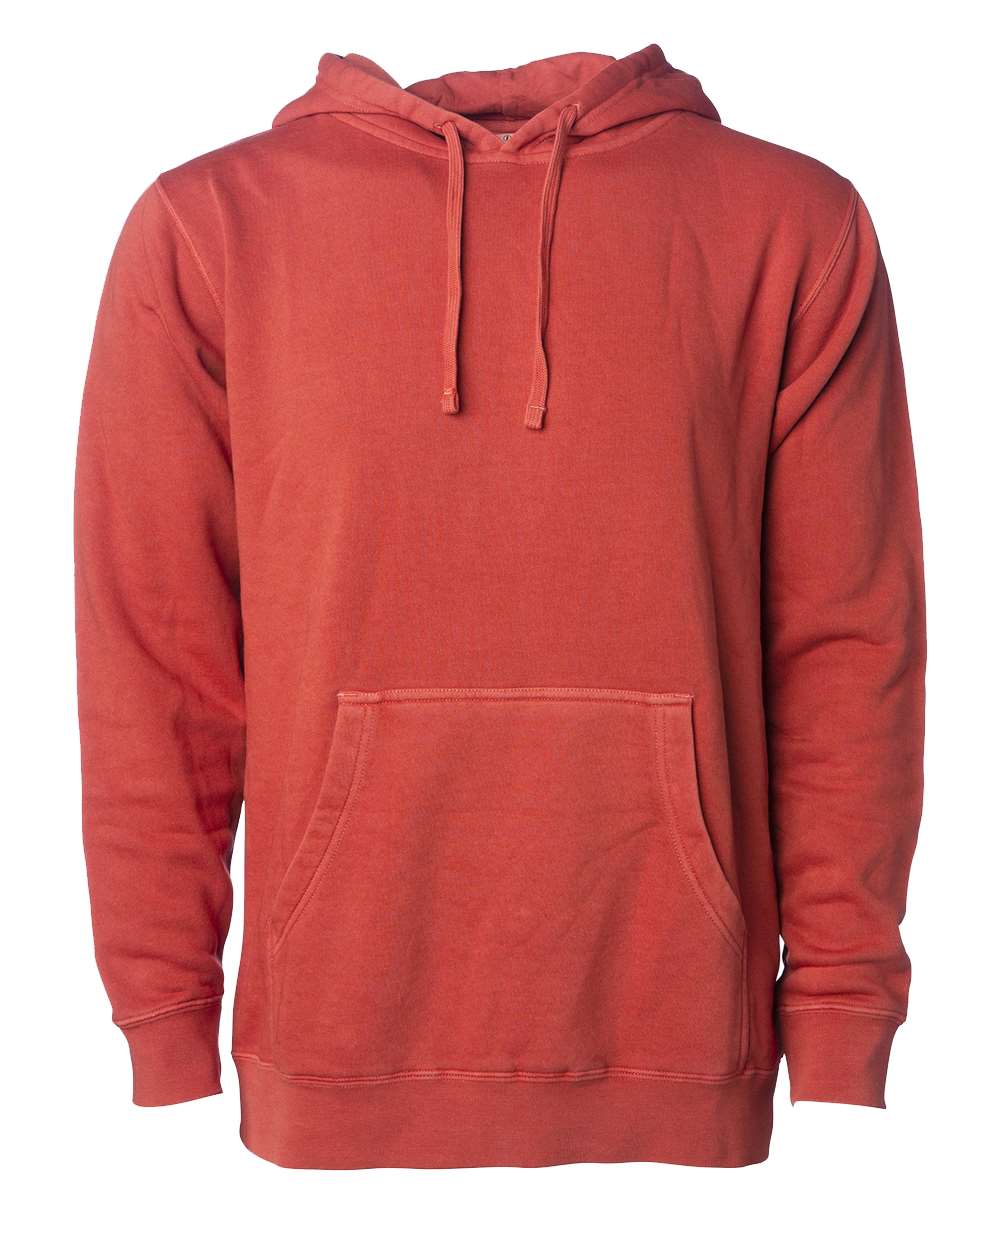 Independent Trading Co. PRM4500 Midweight Pigment-Dyed Hooded Sweatshirt -  Pigment Amber - M